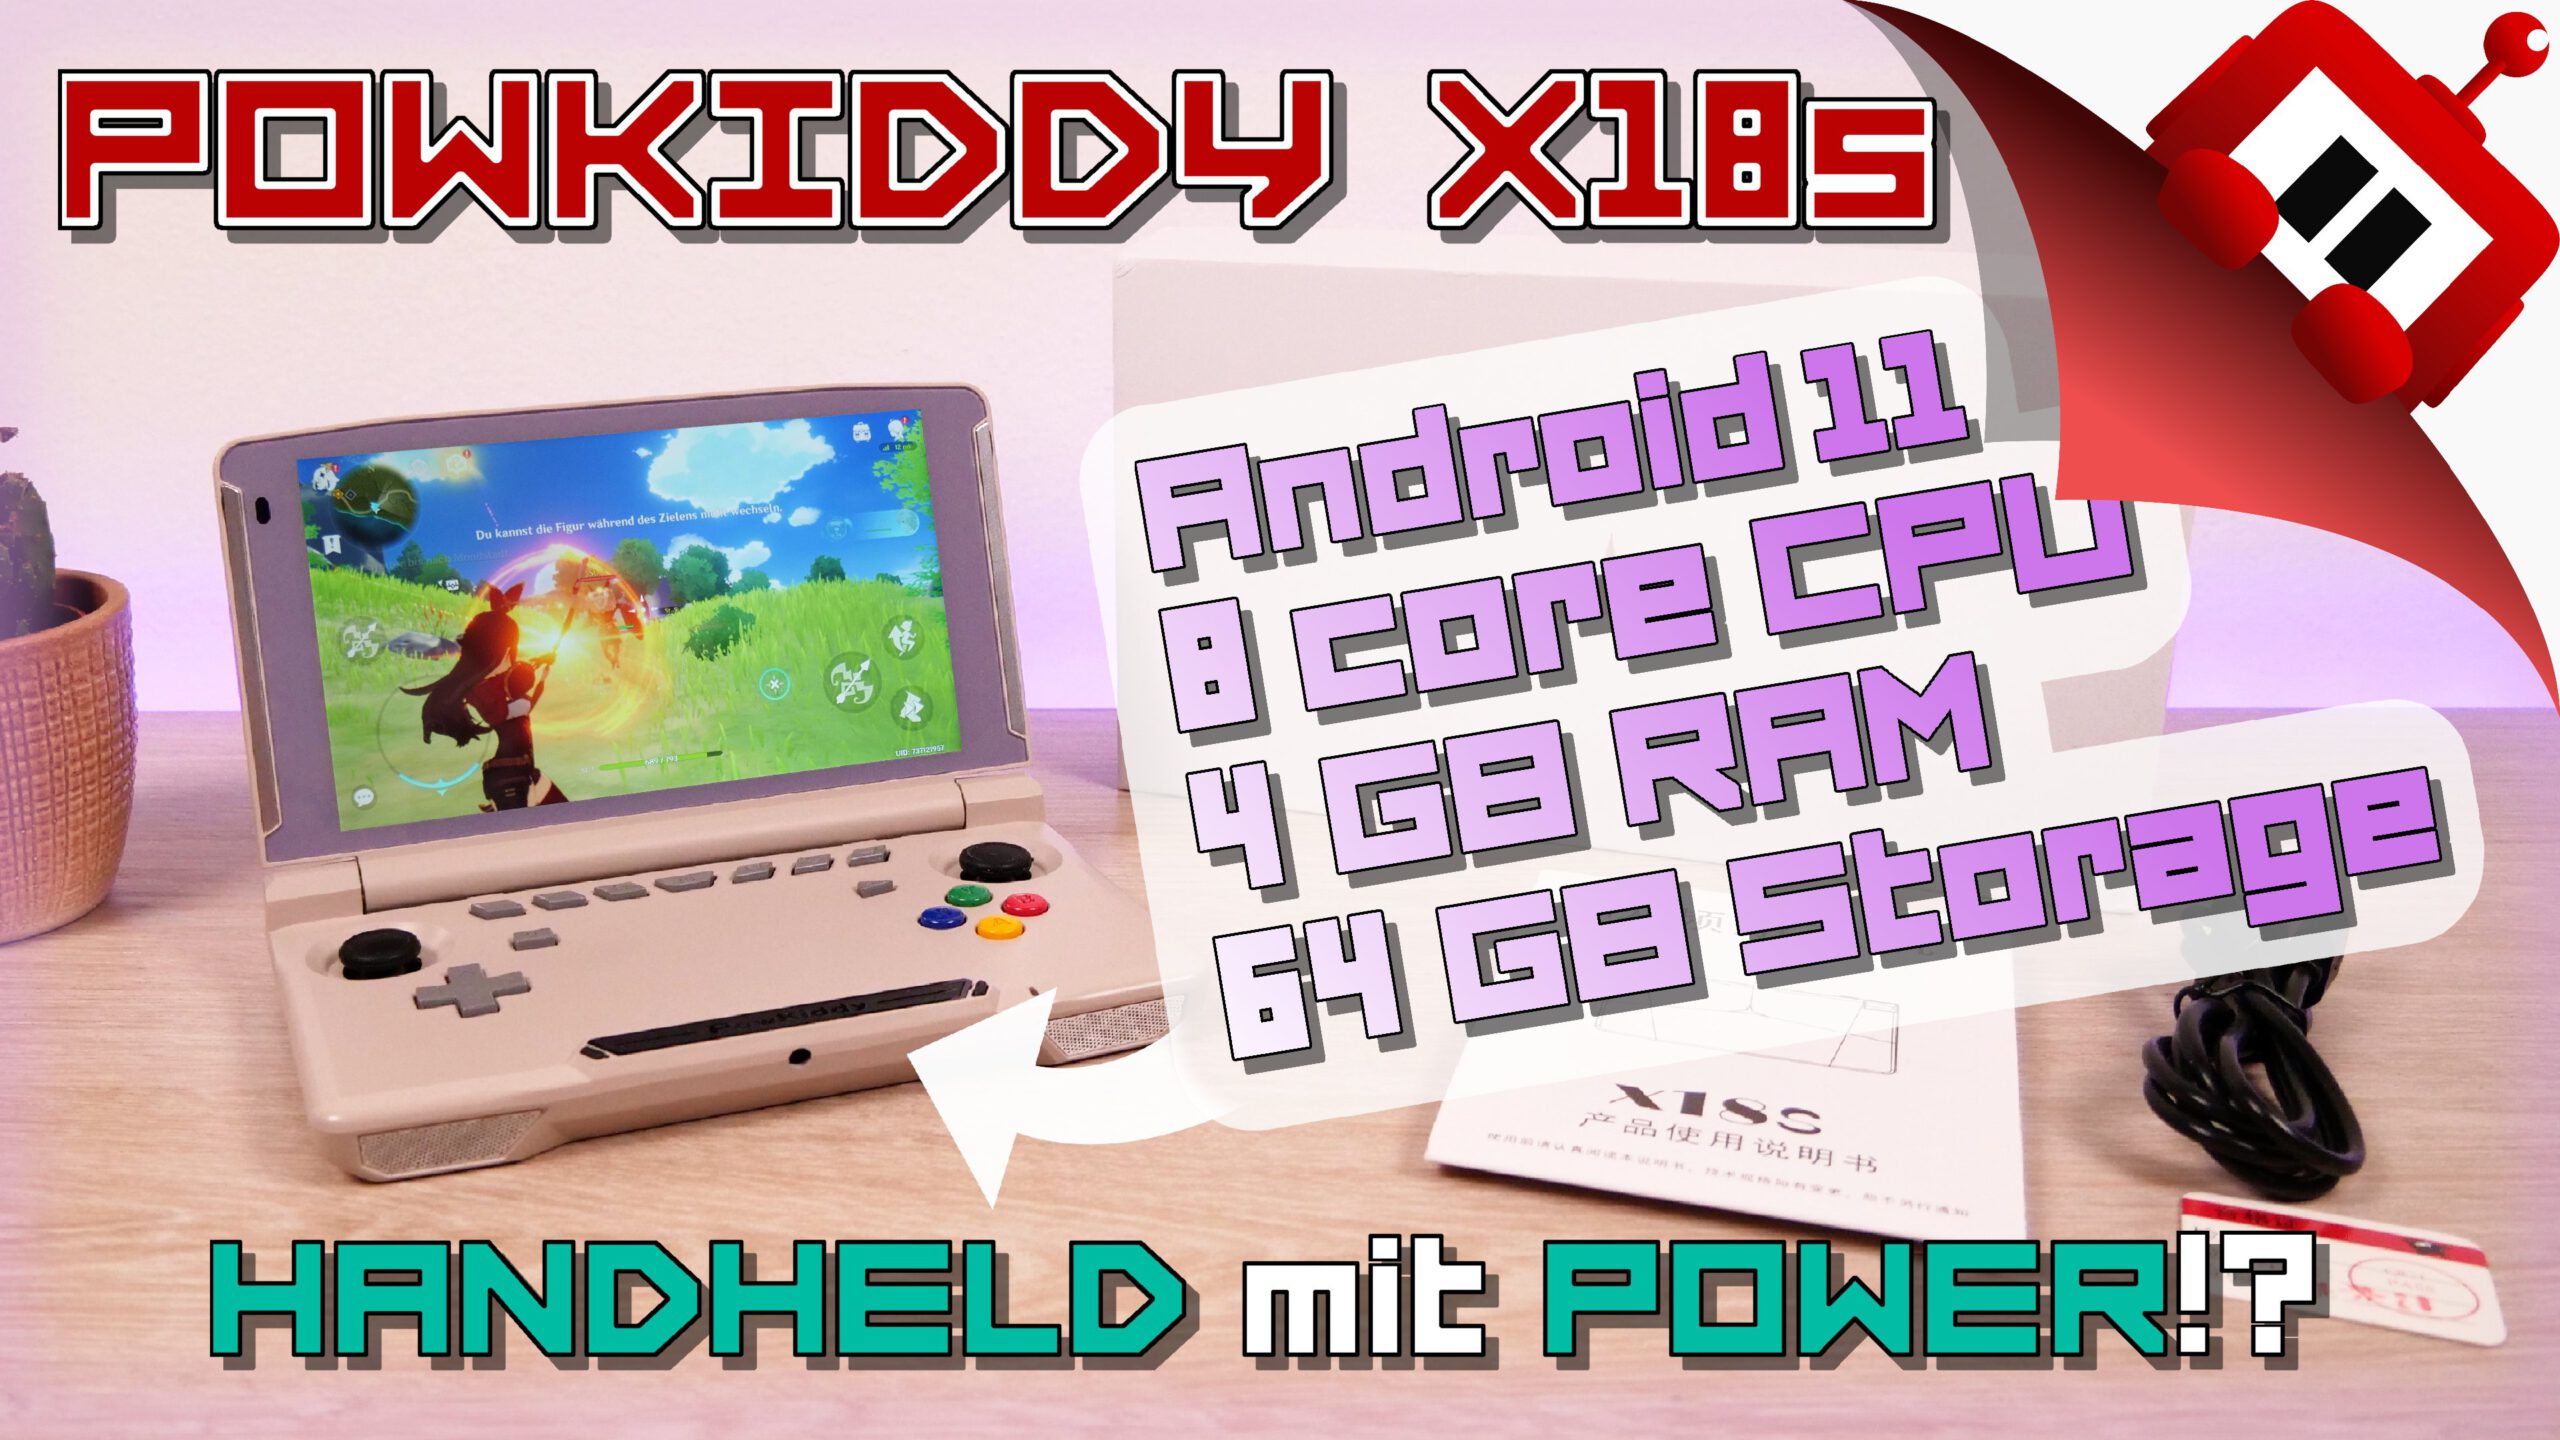 Powkiddy X18s - Review